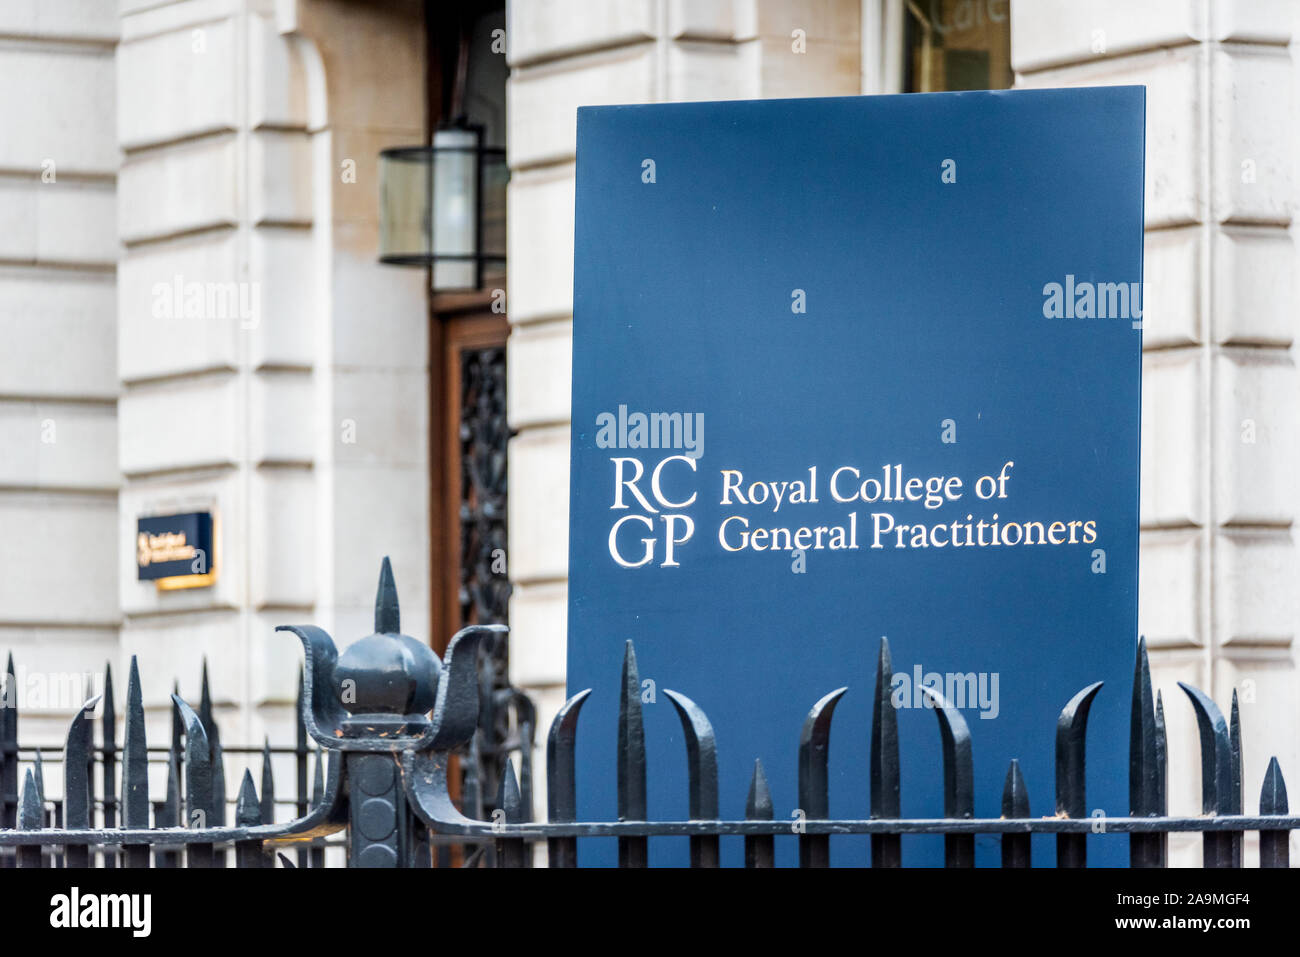 RCGP HQ  - The Royal College of General Practitioners HQ, GPs College, on Euston Square central London UK Stock Photo